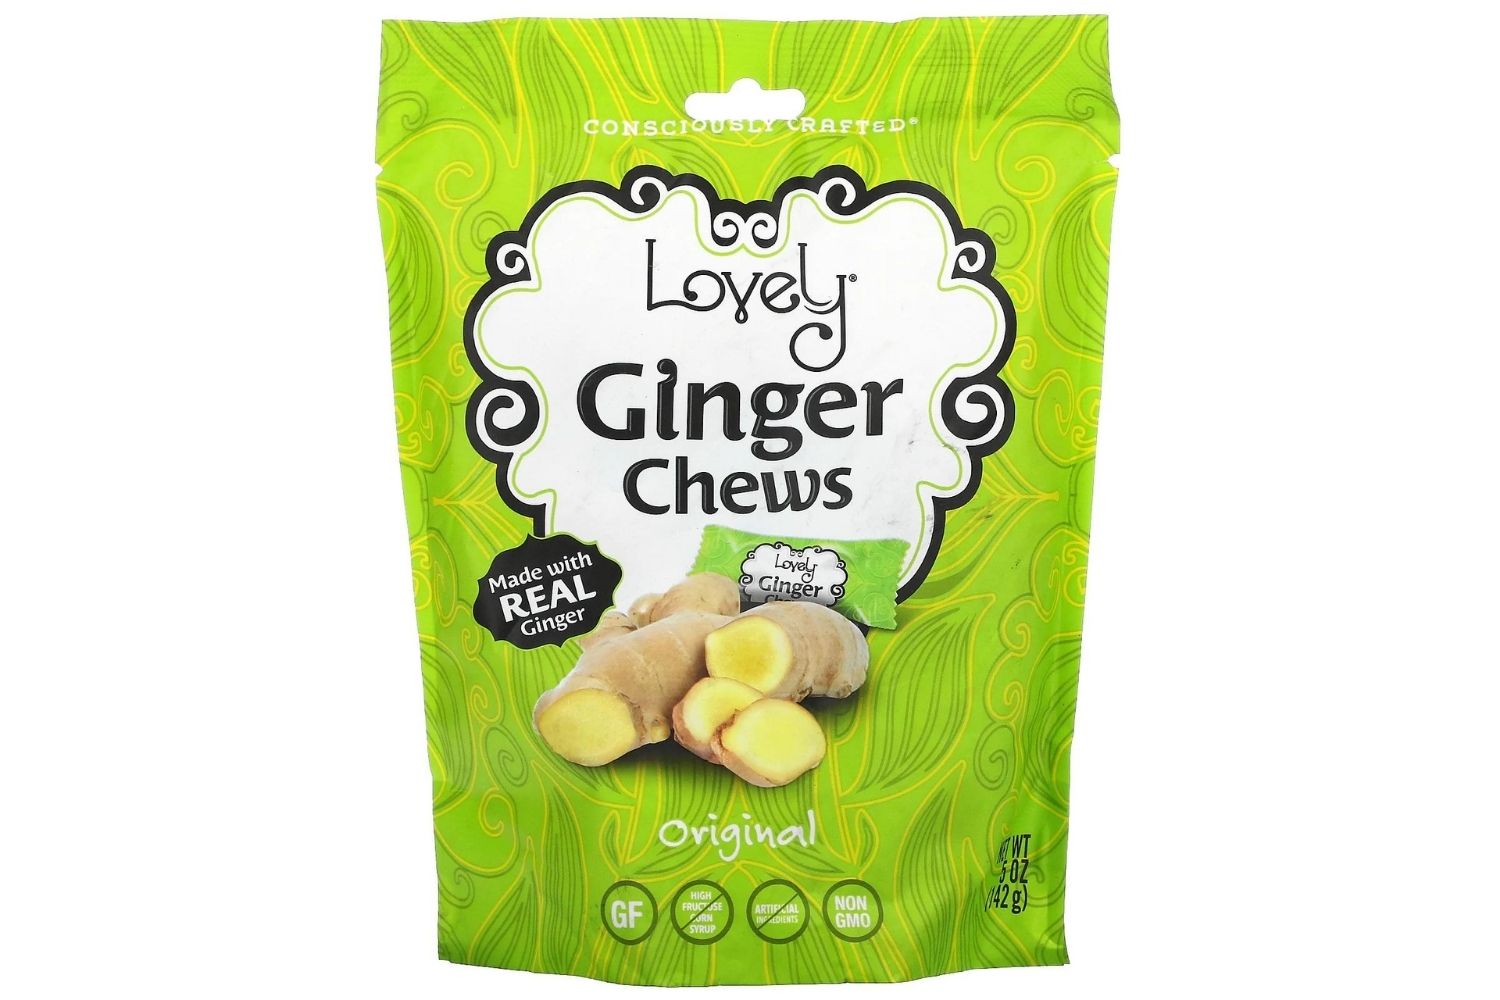 12-astonishing-facts-about-ginger-chews